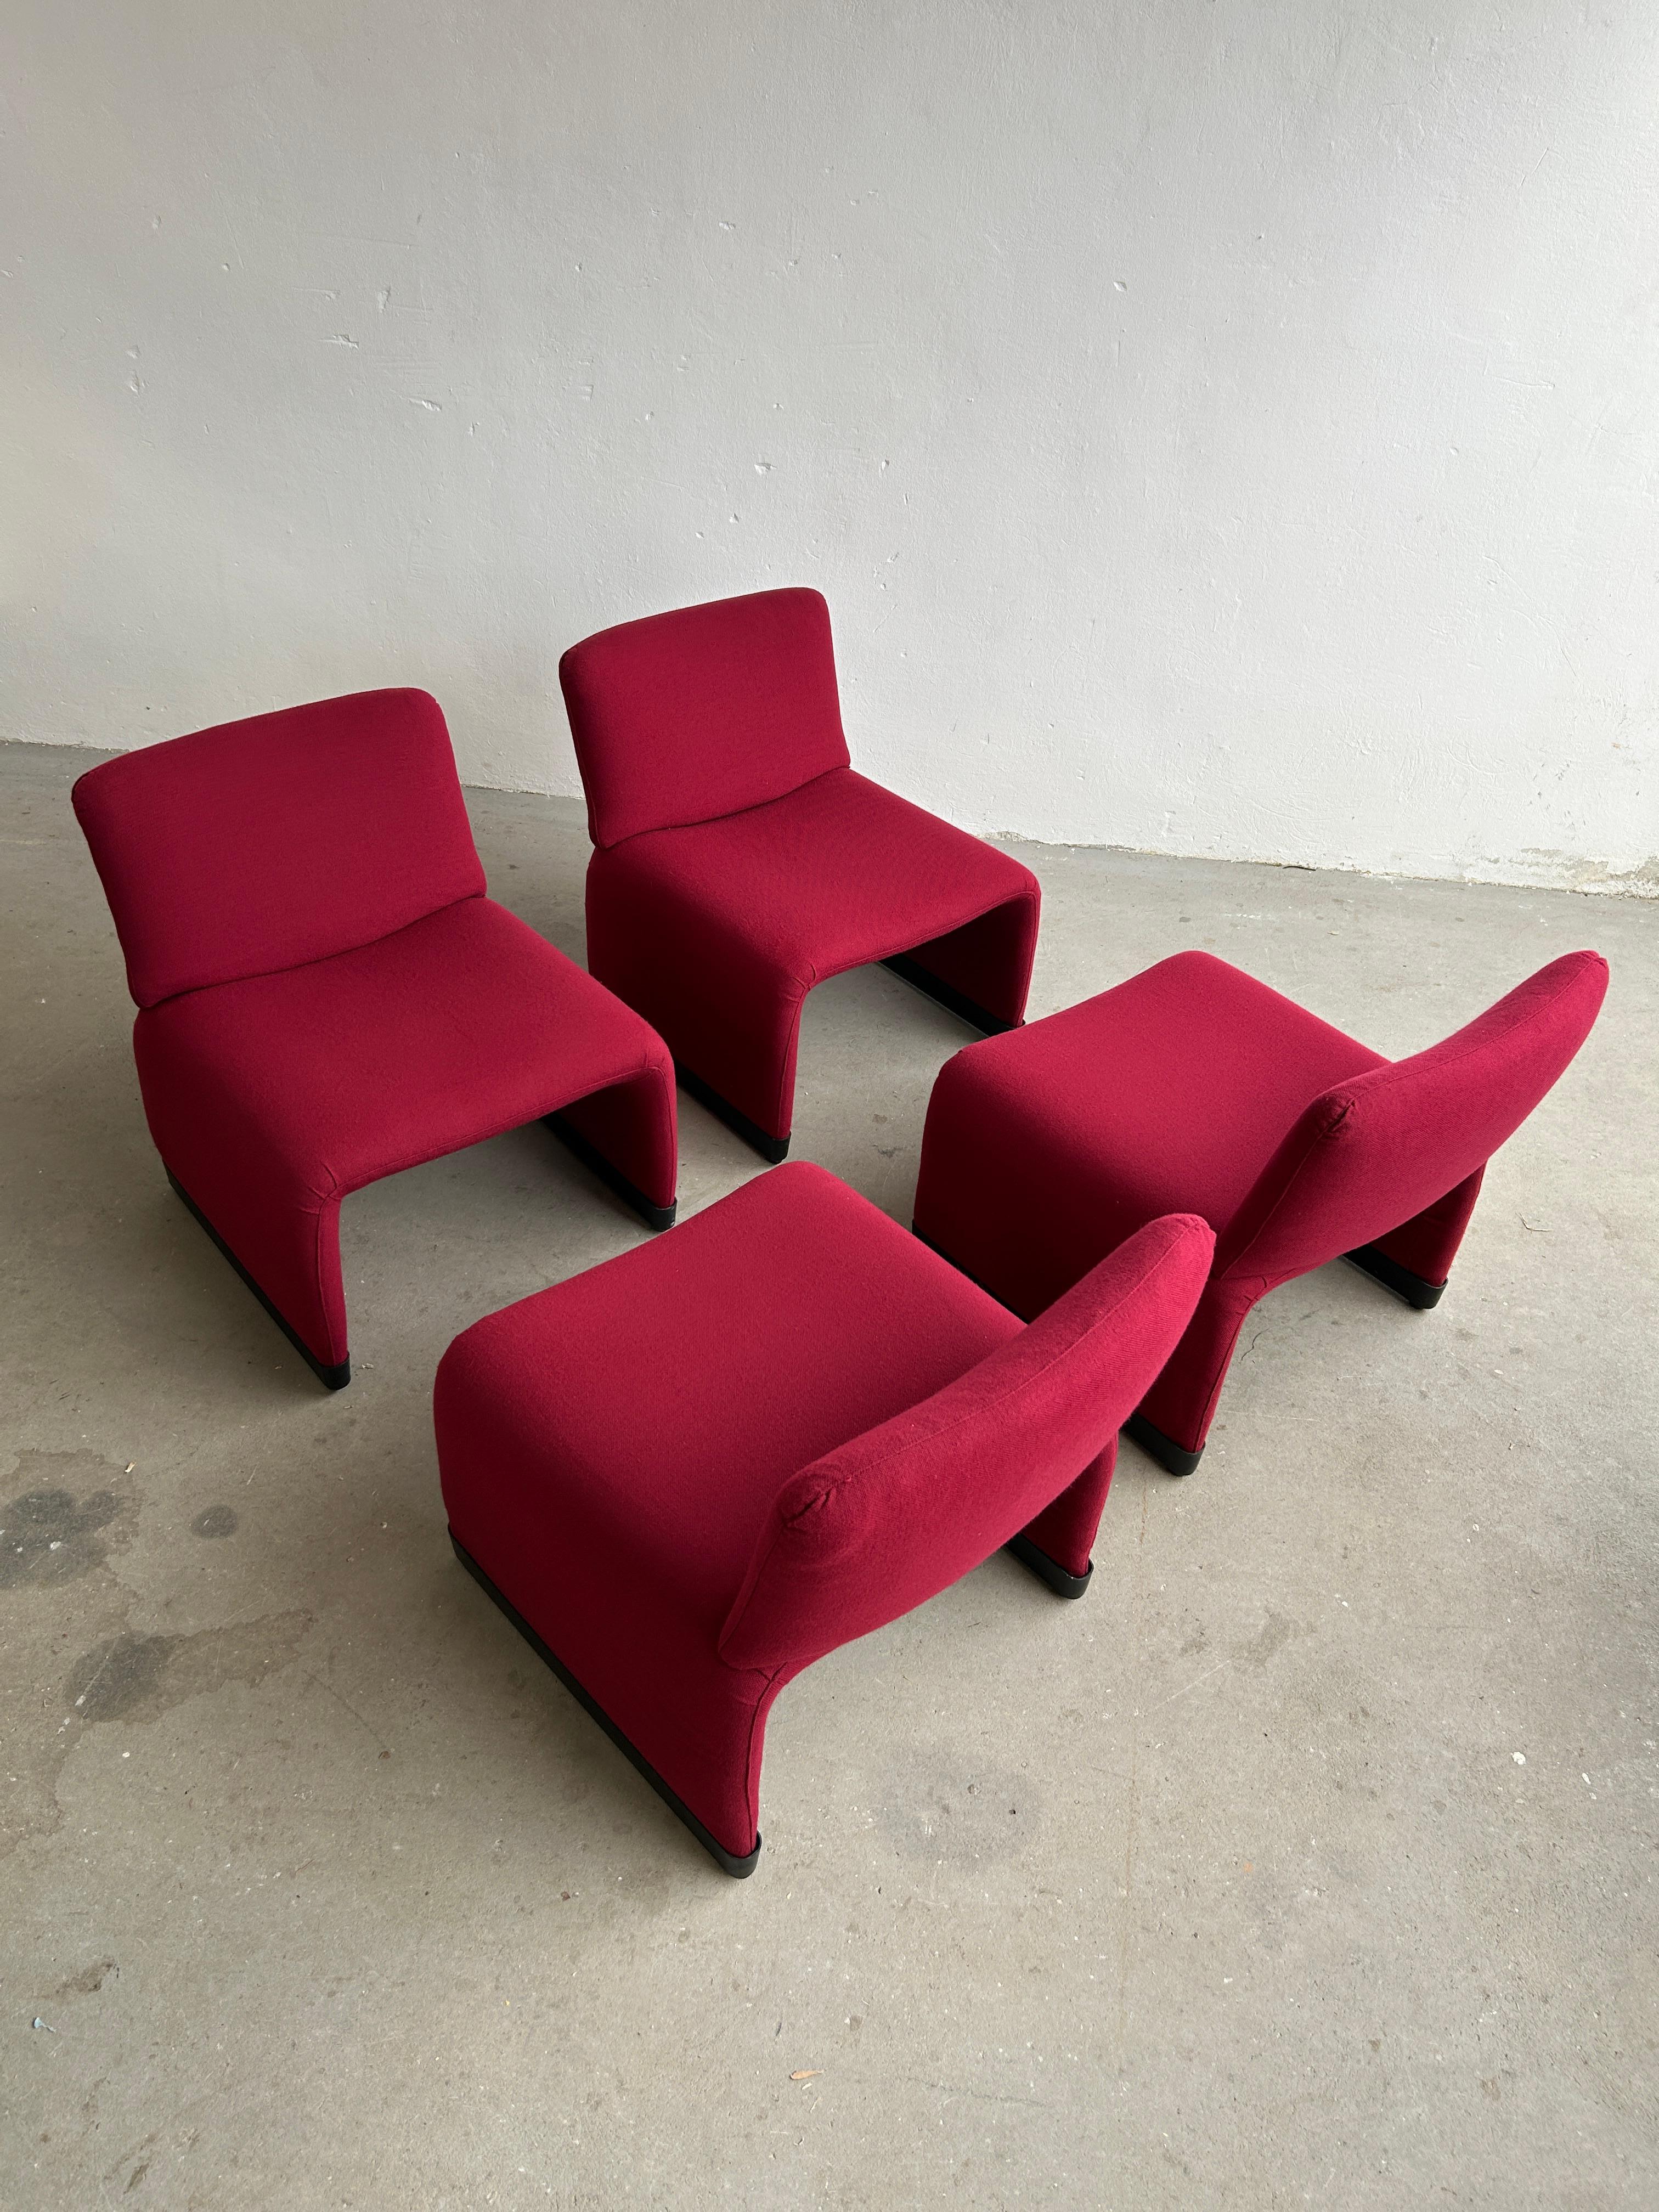 Metal Italian Lounge Chairs in Style of 'Alky' Chair by Giancarlo Piretti, 1970s